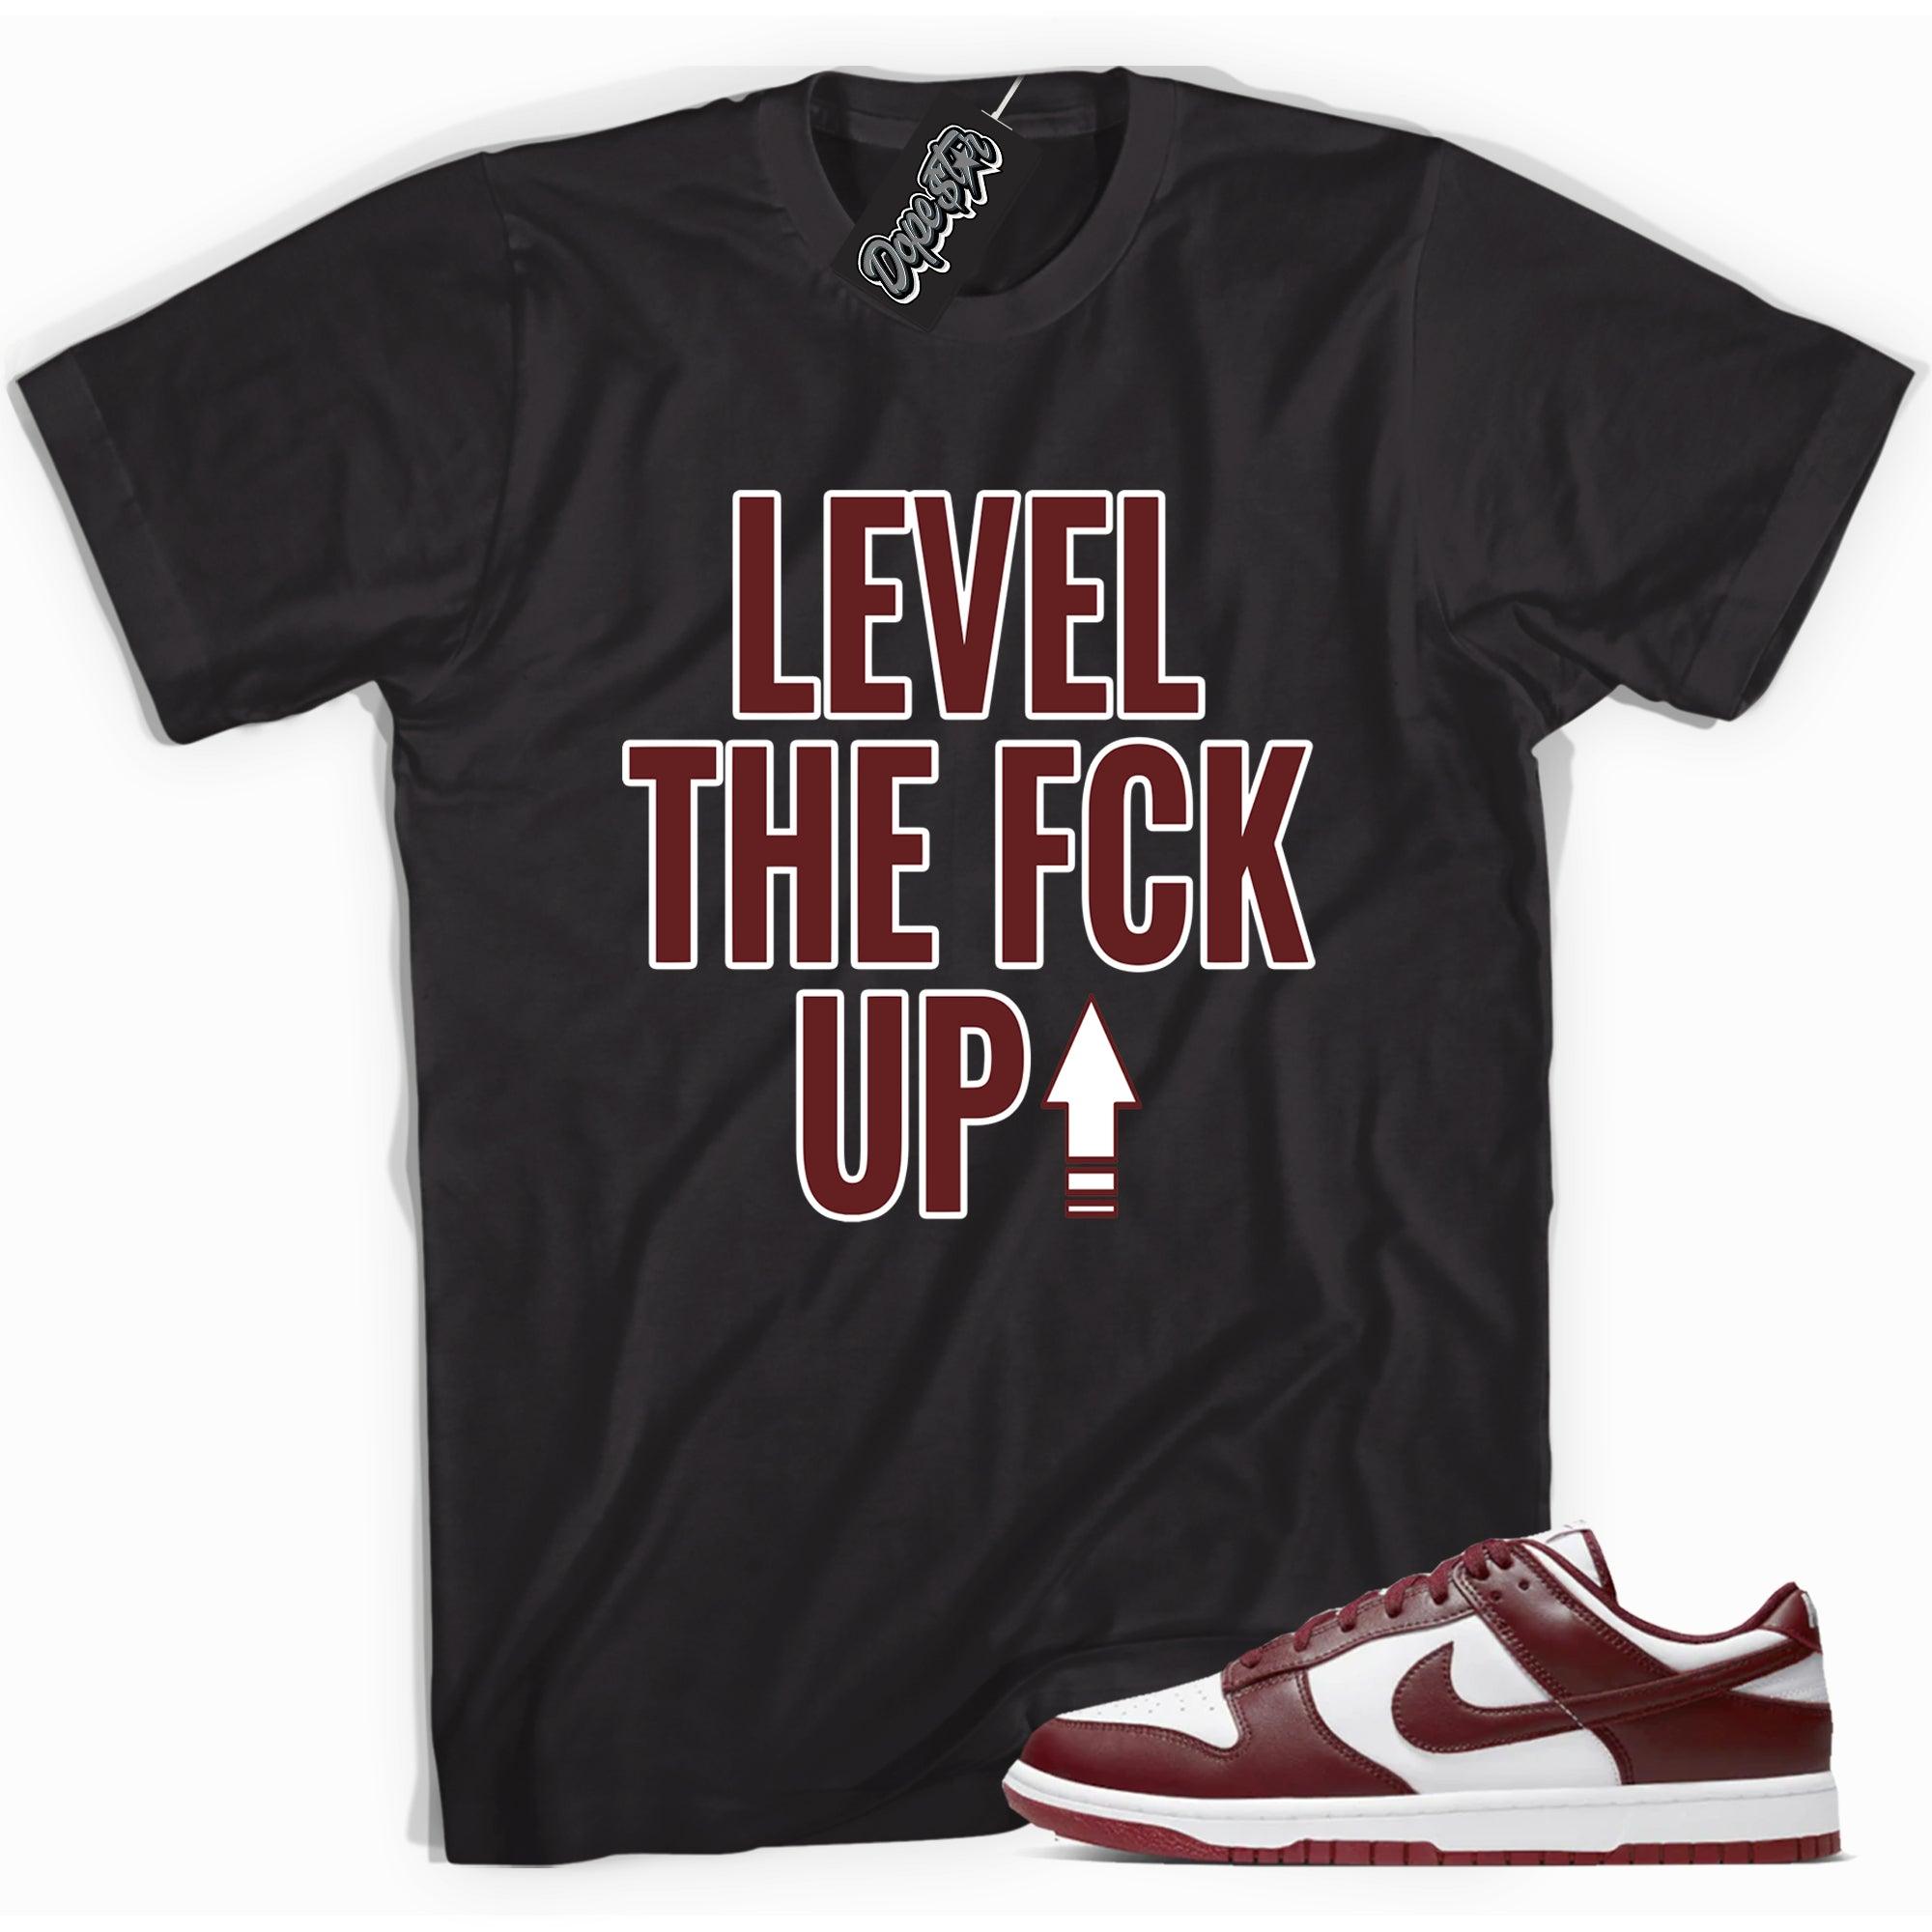 Cool black graphic tee with 'Level Up' print, that perfectly matches Nike Dunk Low Team Red sneakers.